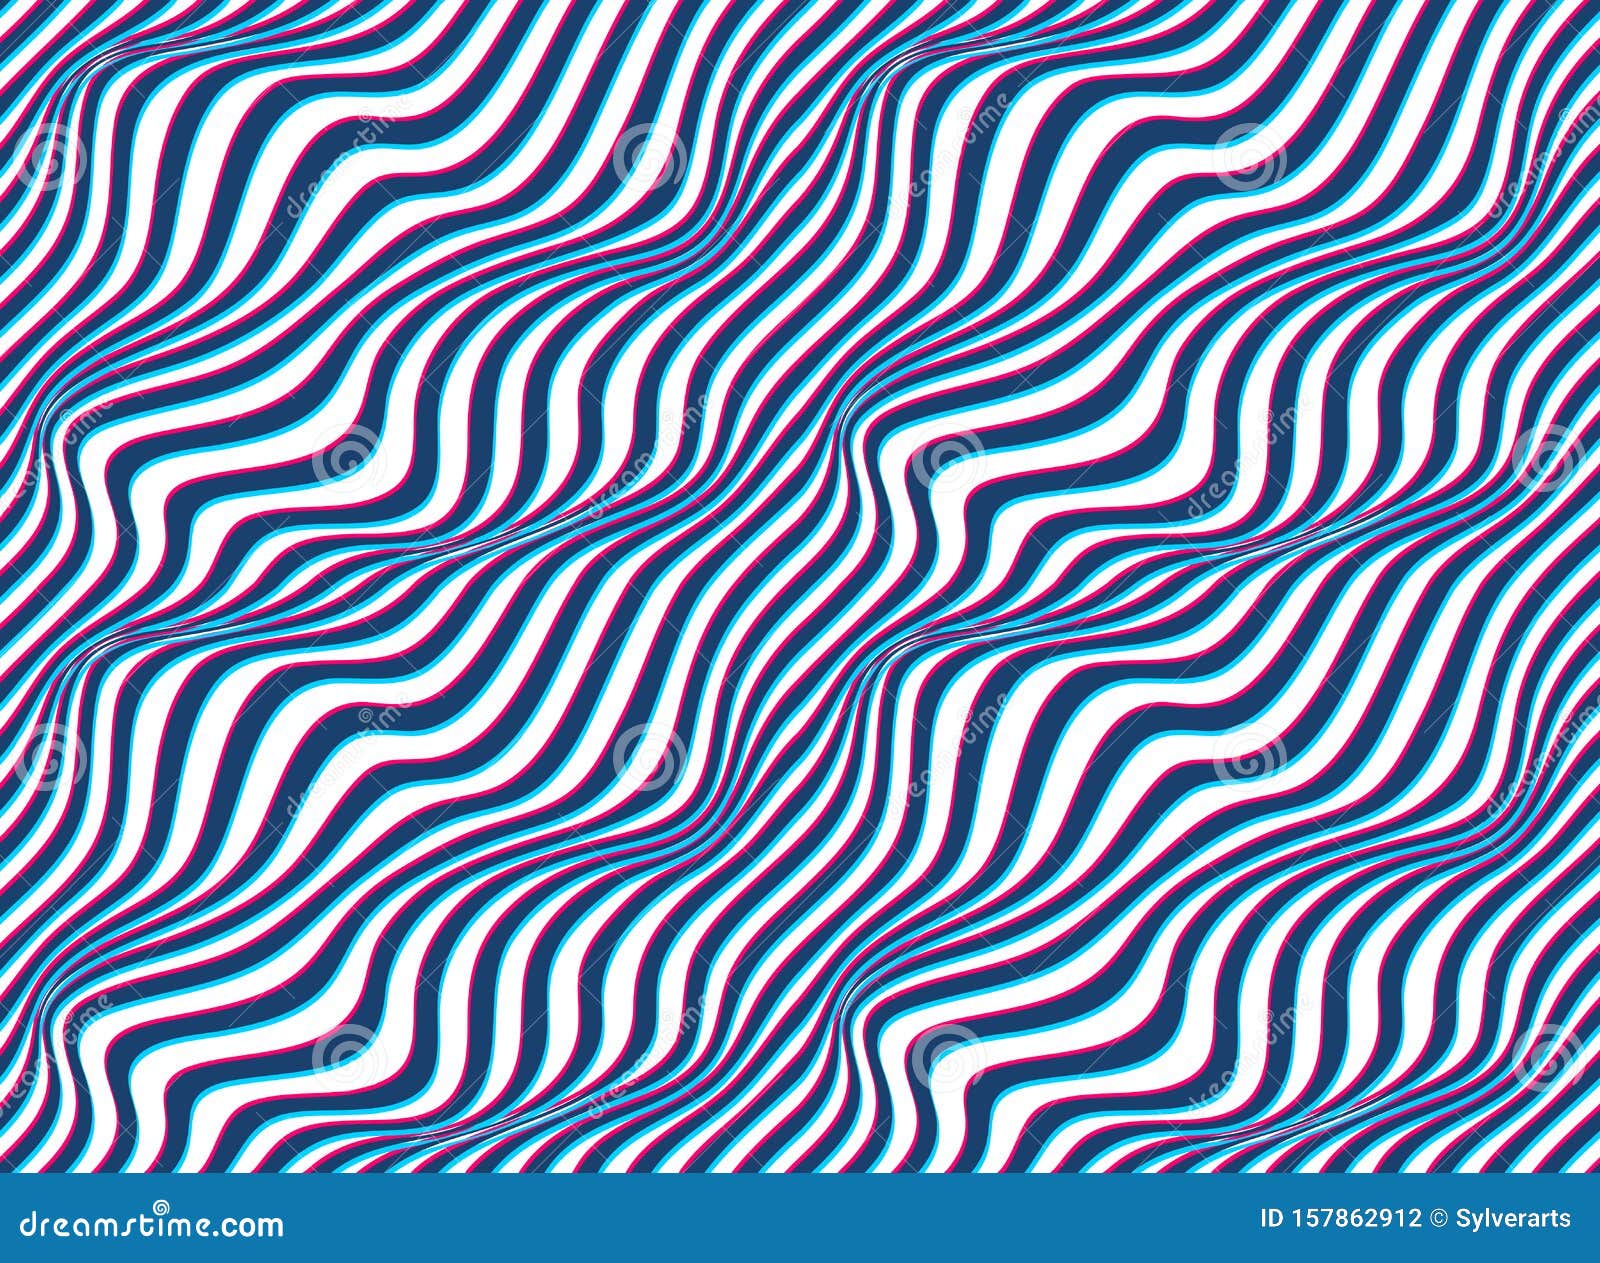 Abstract Lines Seamless Pattern with Optical Illusion, Vector ...